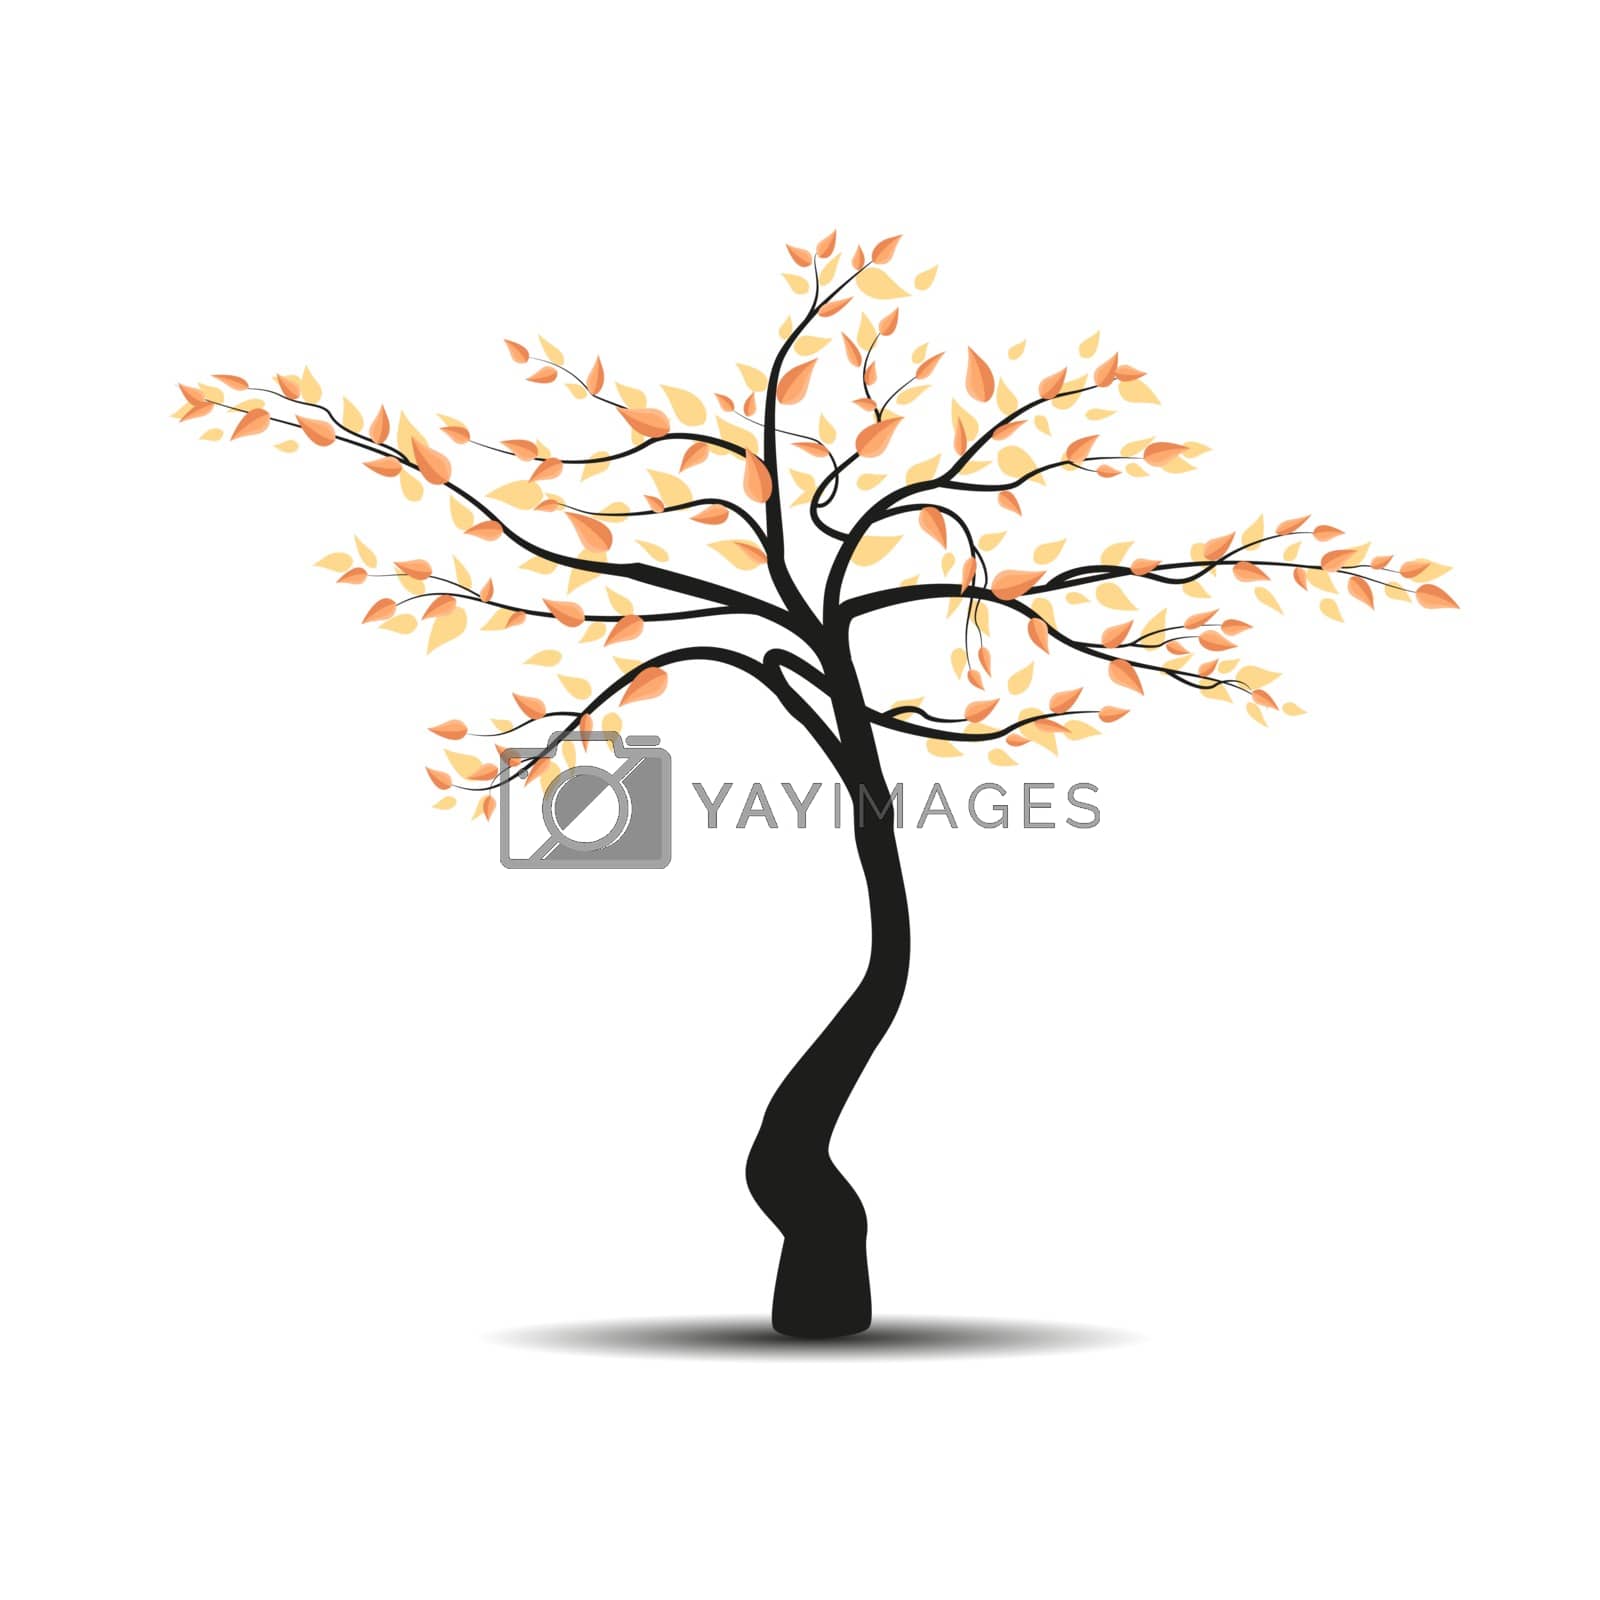 Royalty free image of Autumn tree with falling leaves by odina222